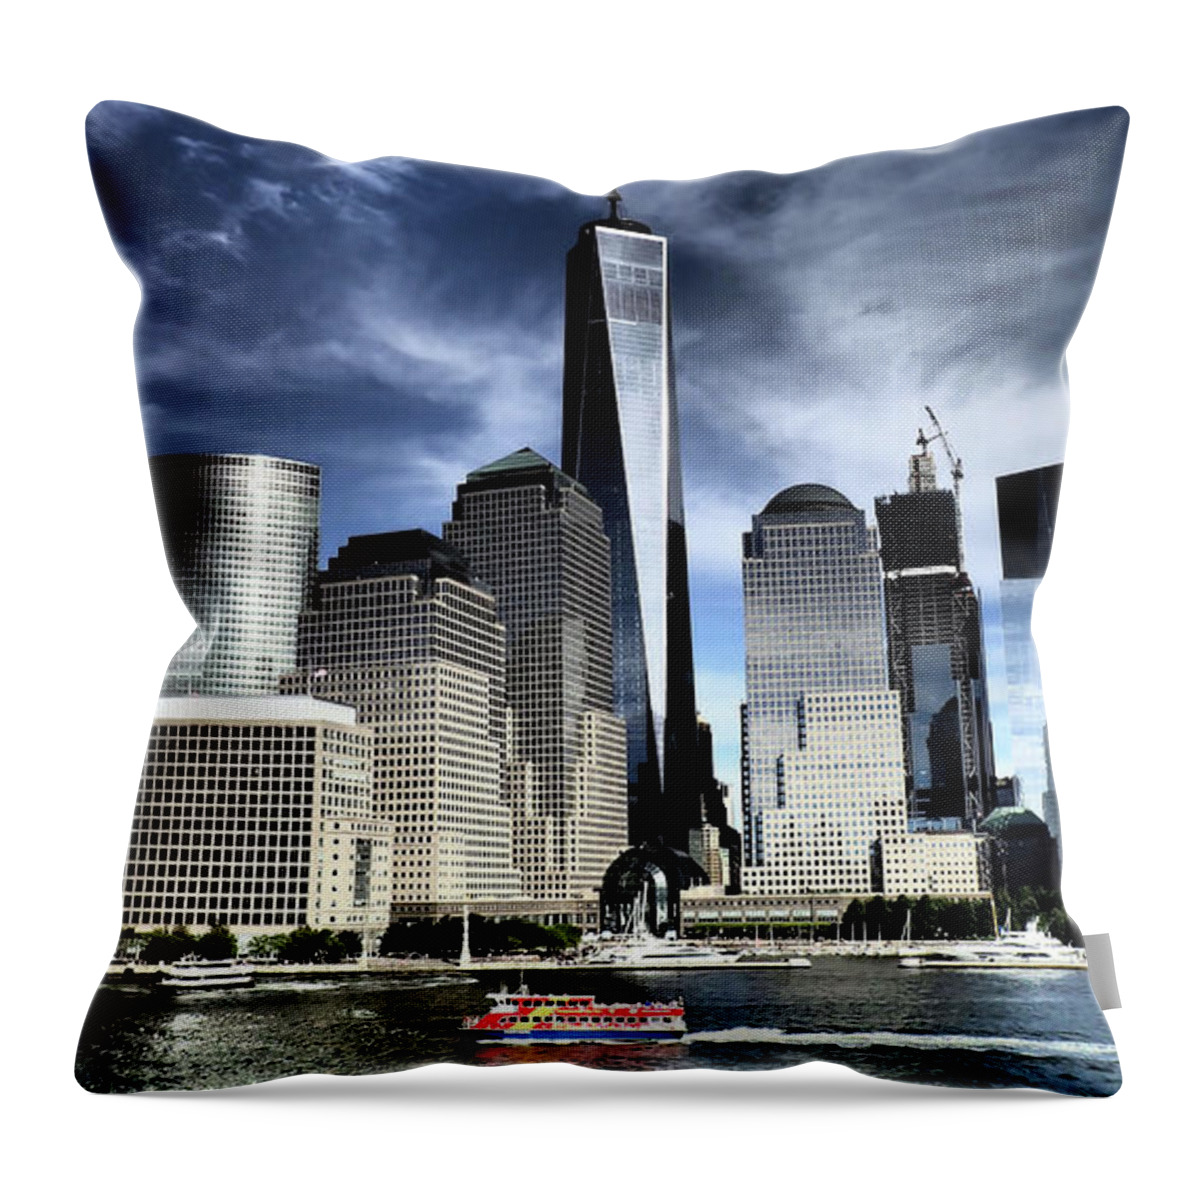 Dramatic Throw Pillow featuring the photograph Dramatic New York City #2 by Susan Jensen